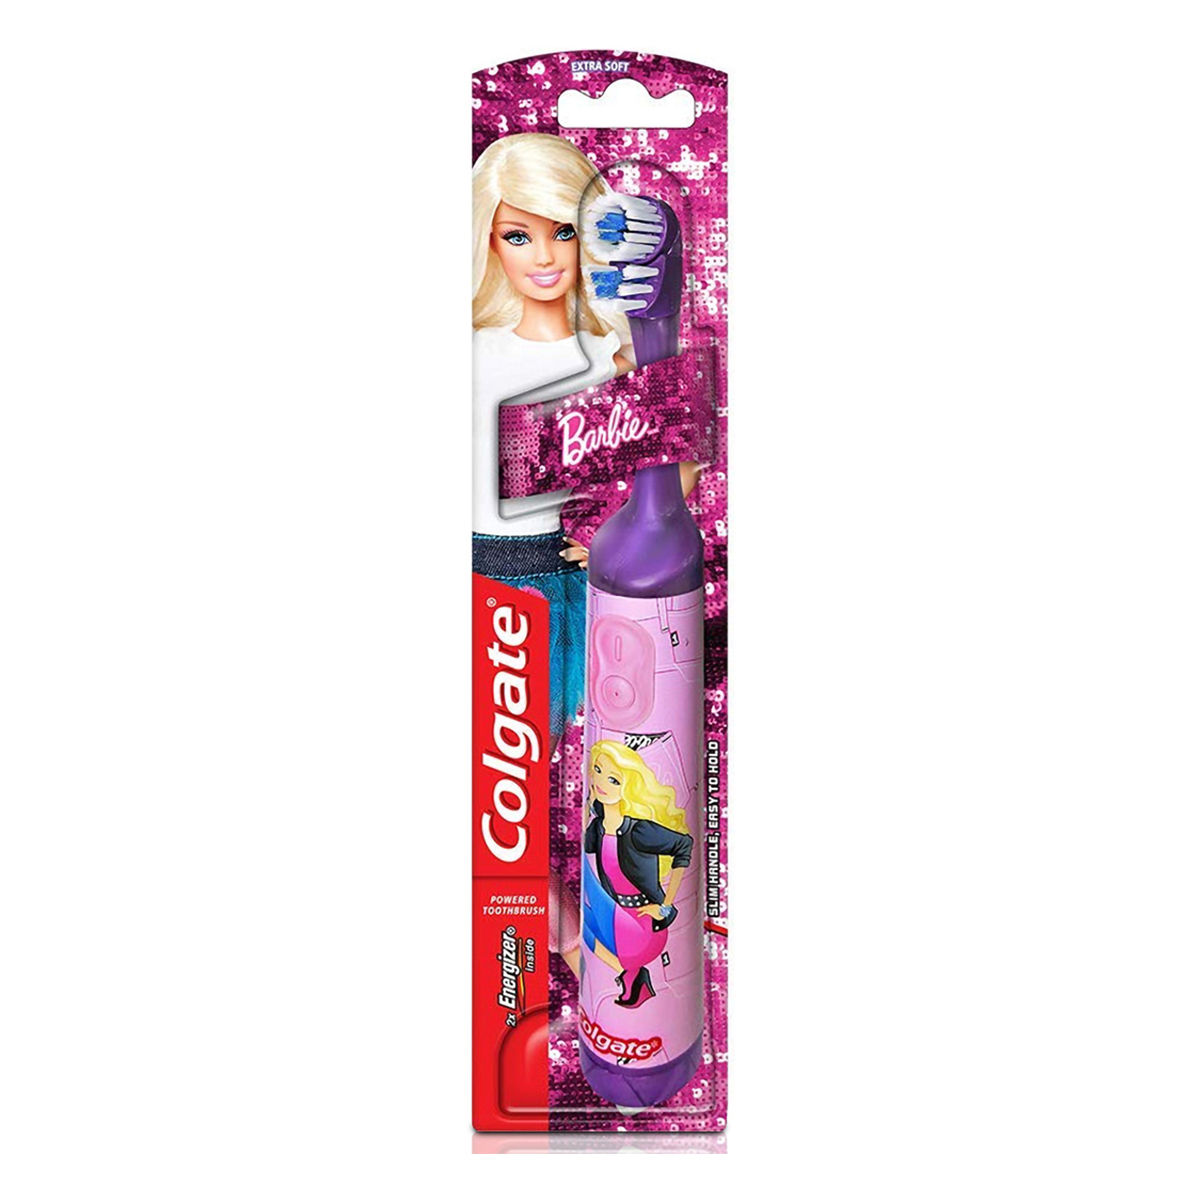 Buy Colgate Barbie Extra Soft Electric Toothbrush, 1 Count Online